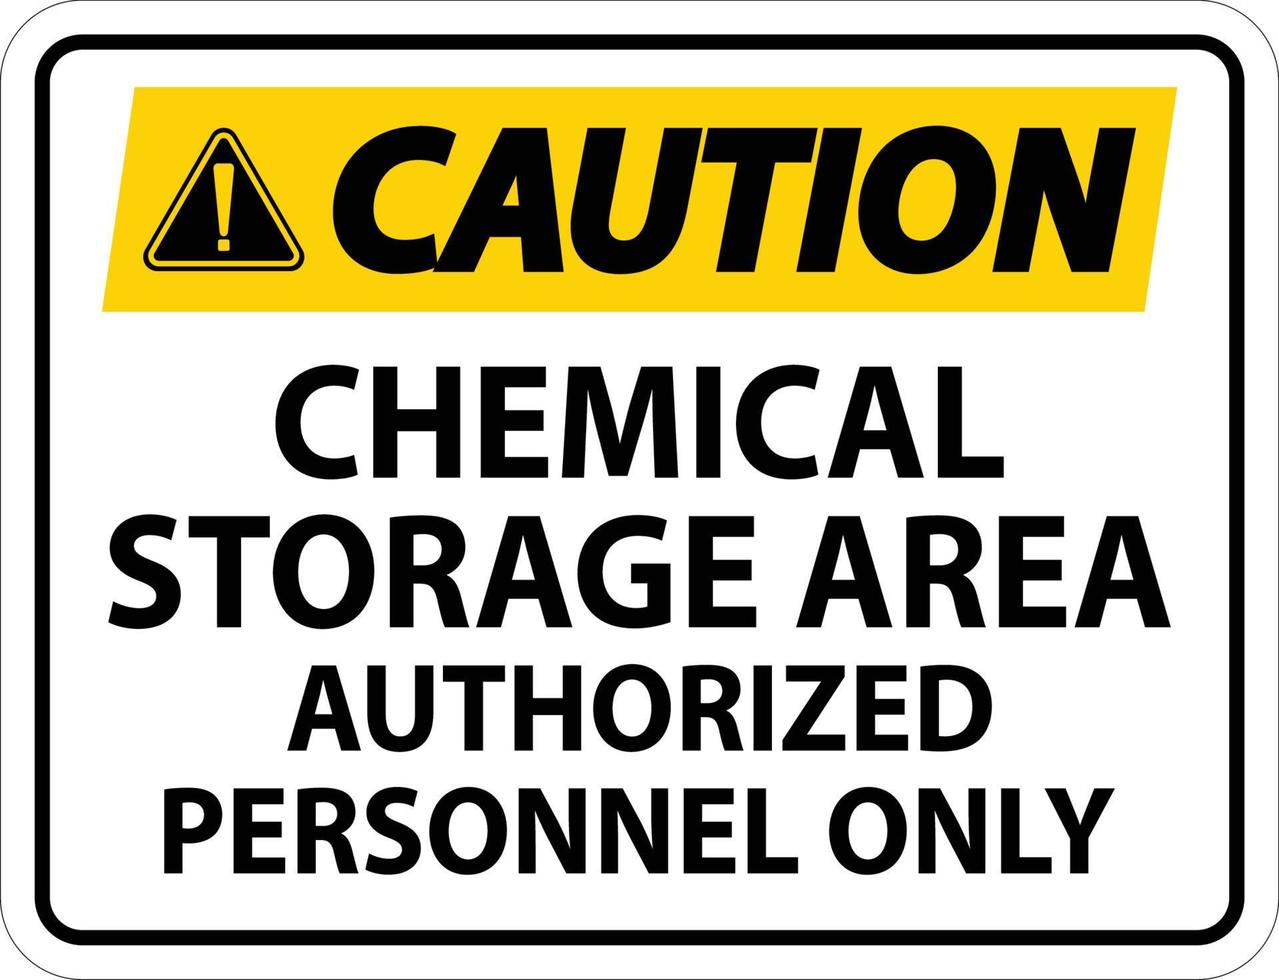 Caution Chemical Storage Area Authorized Personnel Only Symbol Sign vector